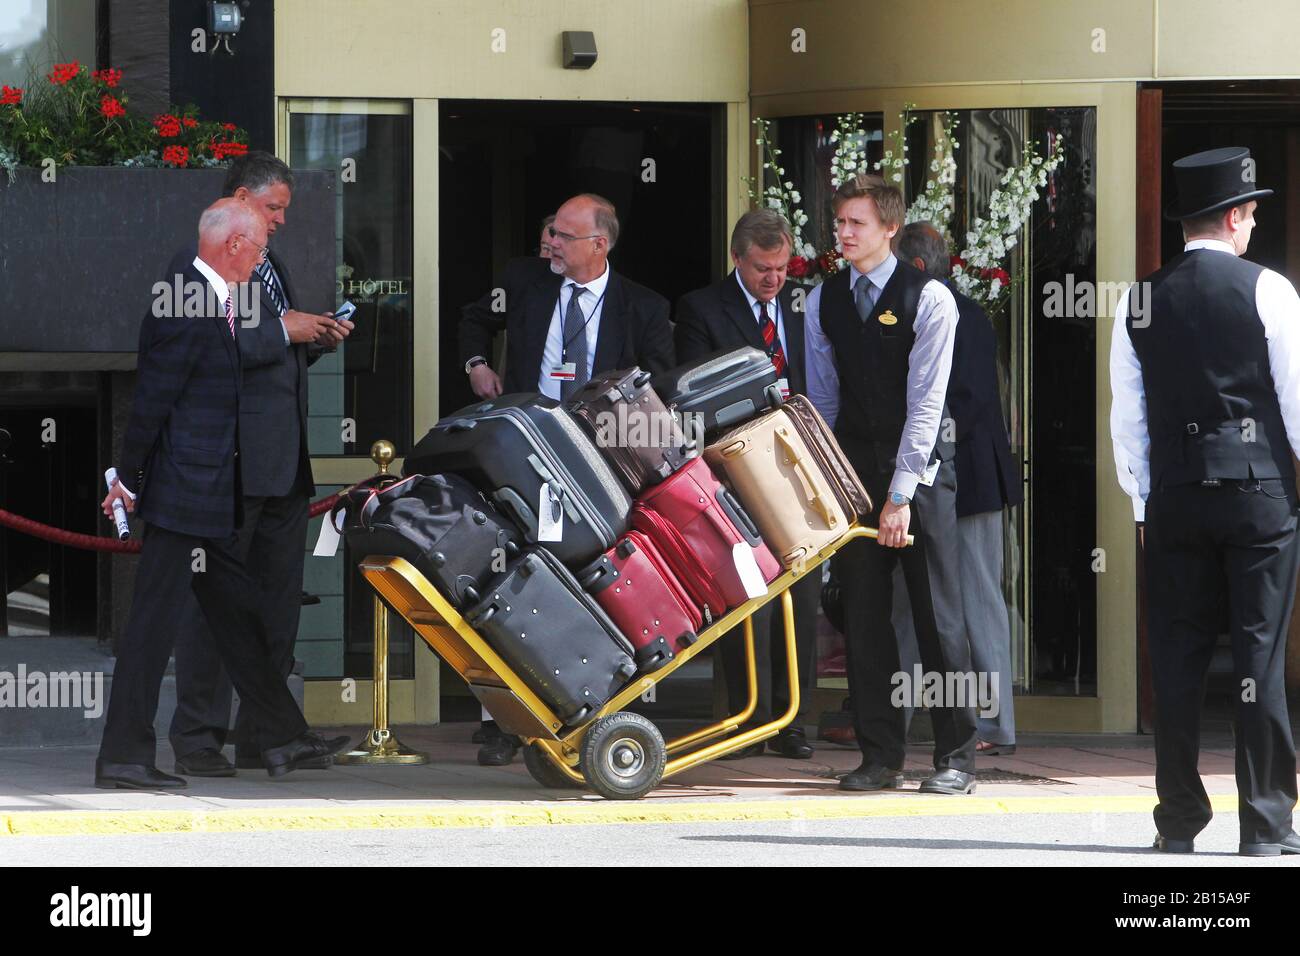 Staff with luggage outside the Grand Hotel before the wedding between Crown Princess Victoria and Prince Daniel. The wedding of Victoria, Crown Princess of Sweden, and Daniel Westling took place on 19 June 2010 in Stockholm Cathedral.Stockholm 2010-06-19 Photo Jeppe Gustafsson Stock Photo